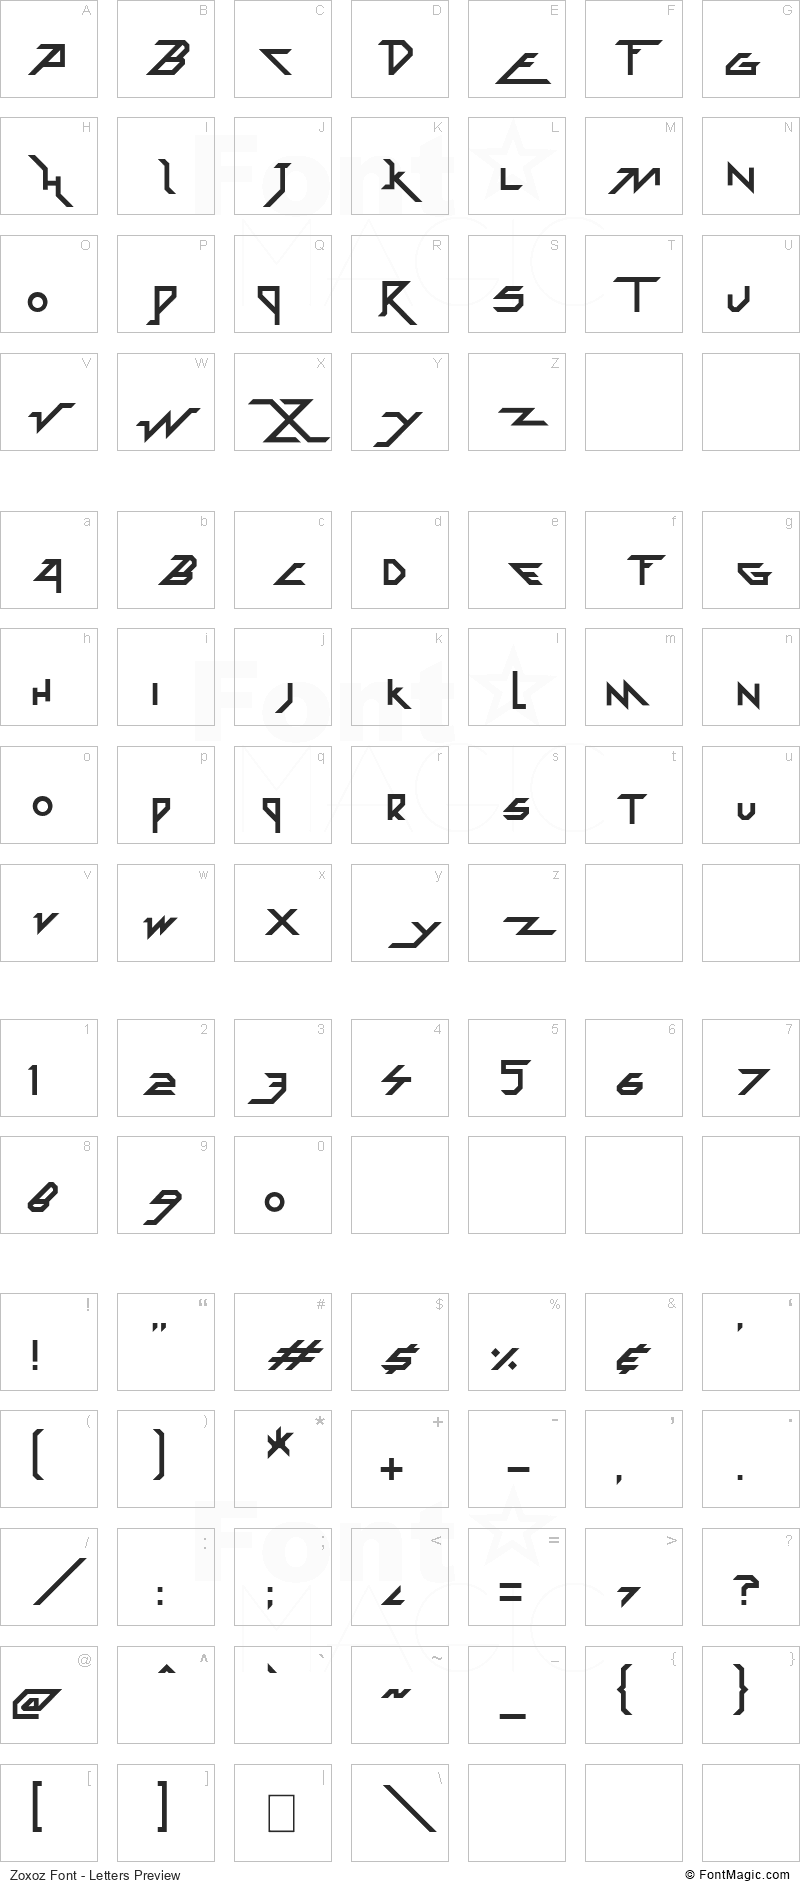 Zoxoz Font - All Latters Preview Chart